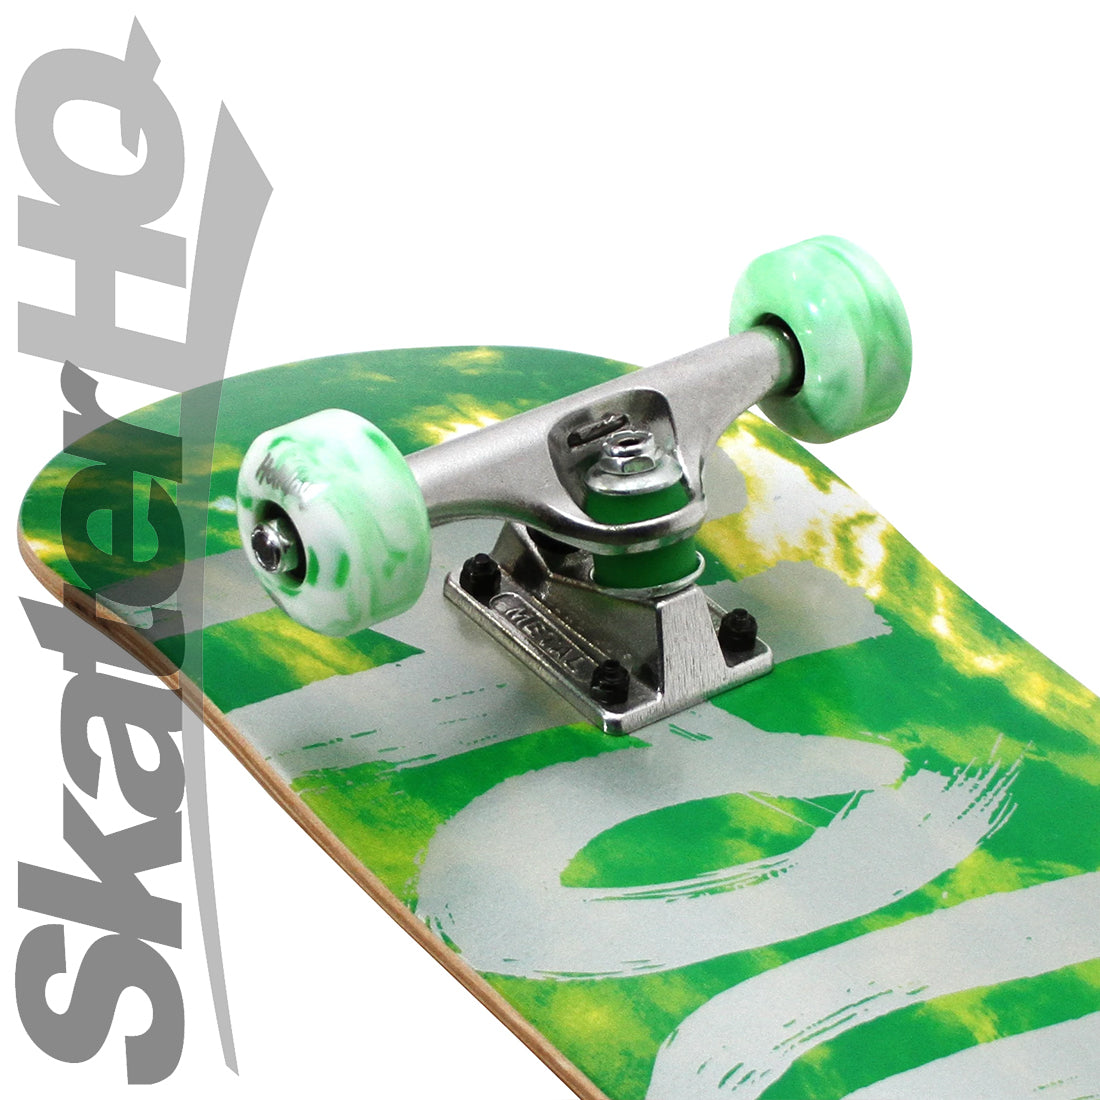 Holiday Tie Dye 8.0 Complete - Green/Silver Skateboard Completes Modern Street